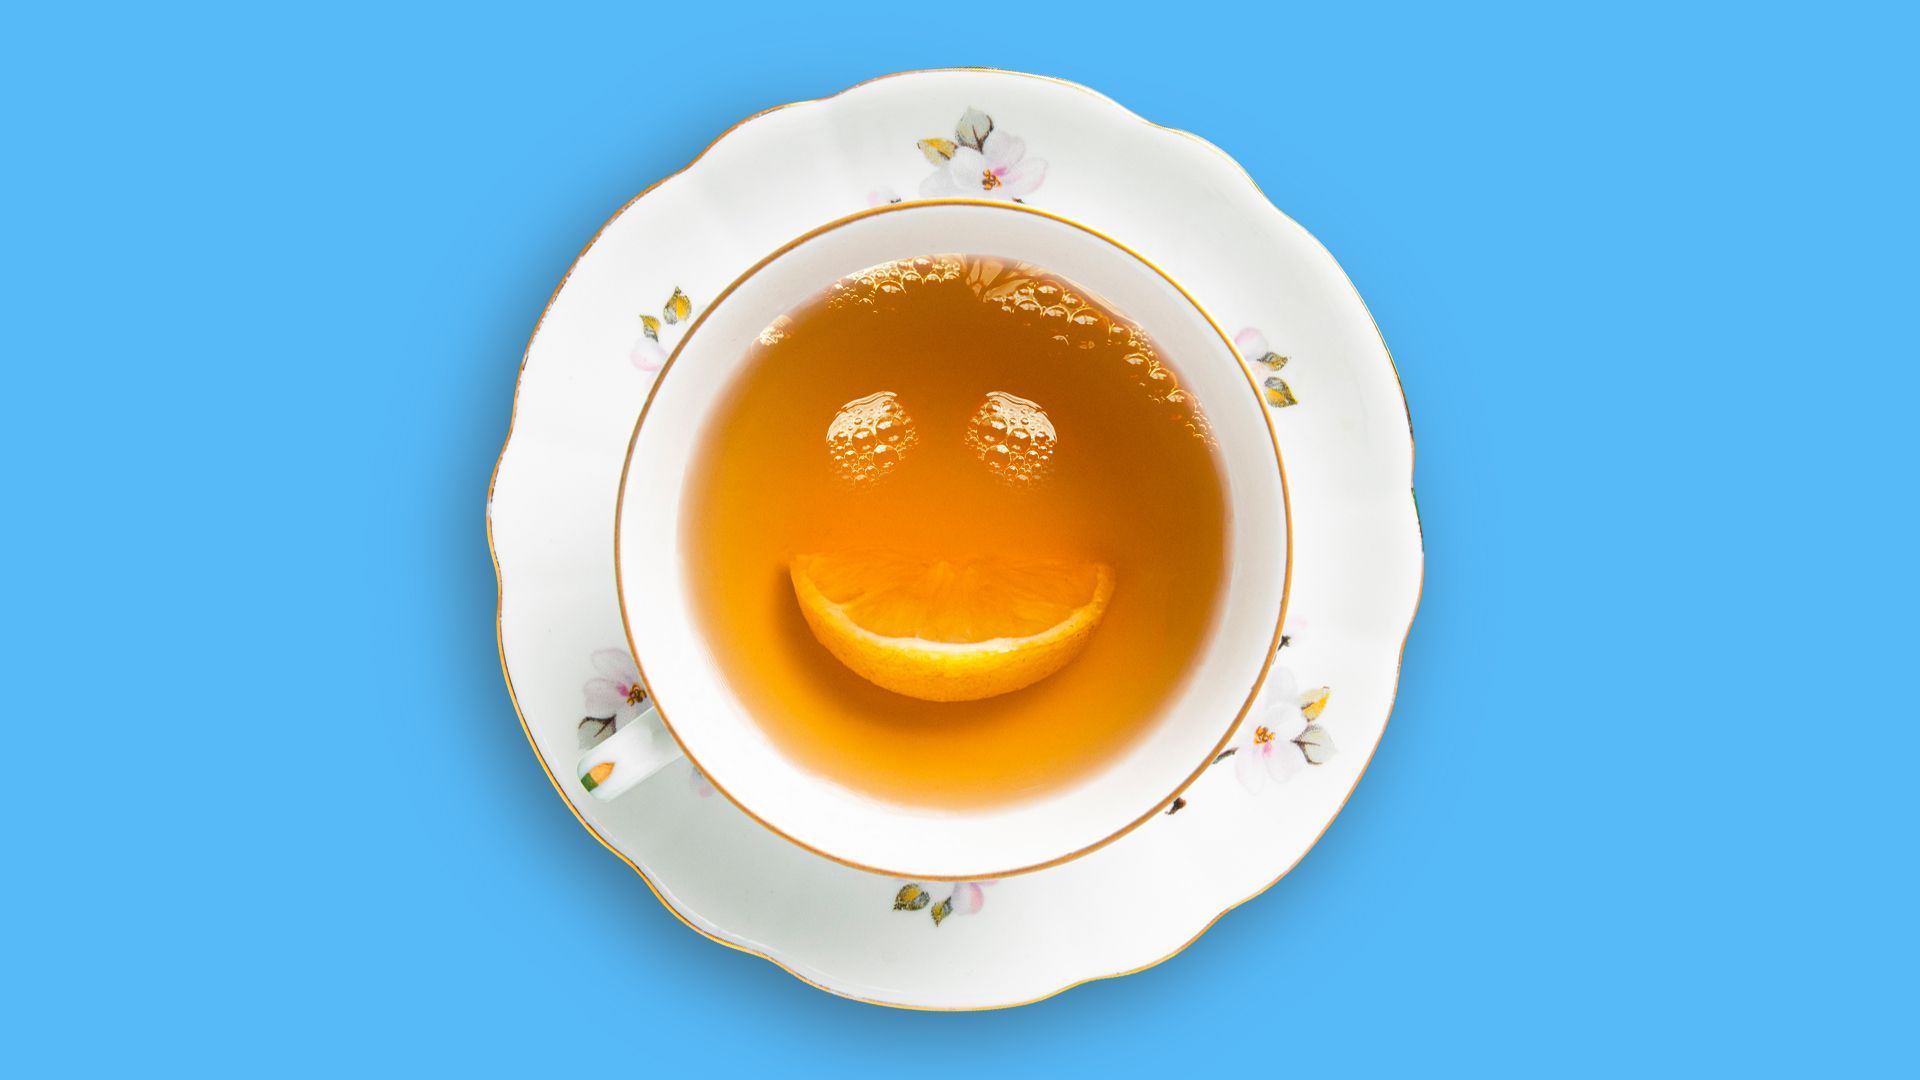 Illustration of a tea cup with bubbles and a lemon slice creating a smiley face